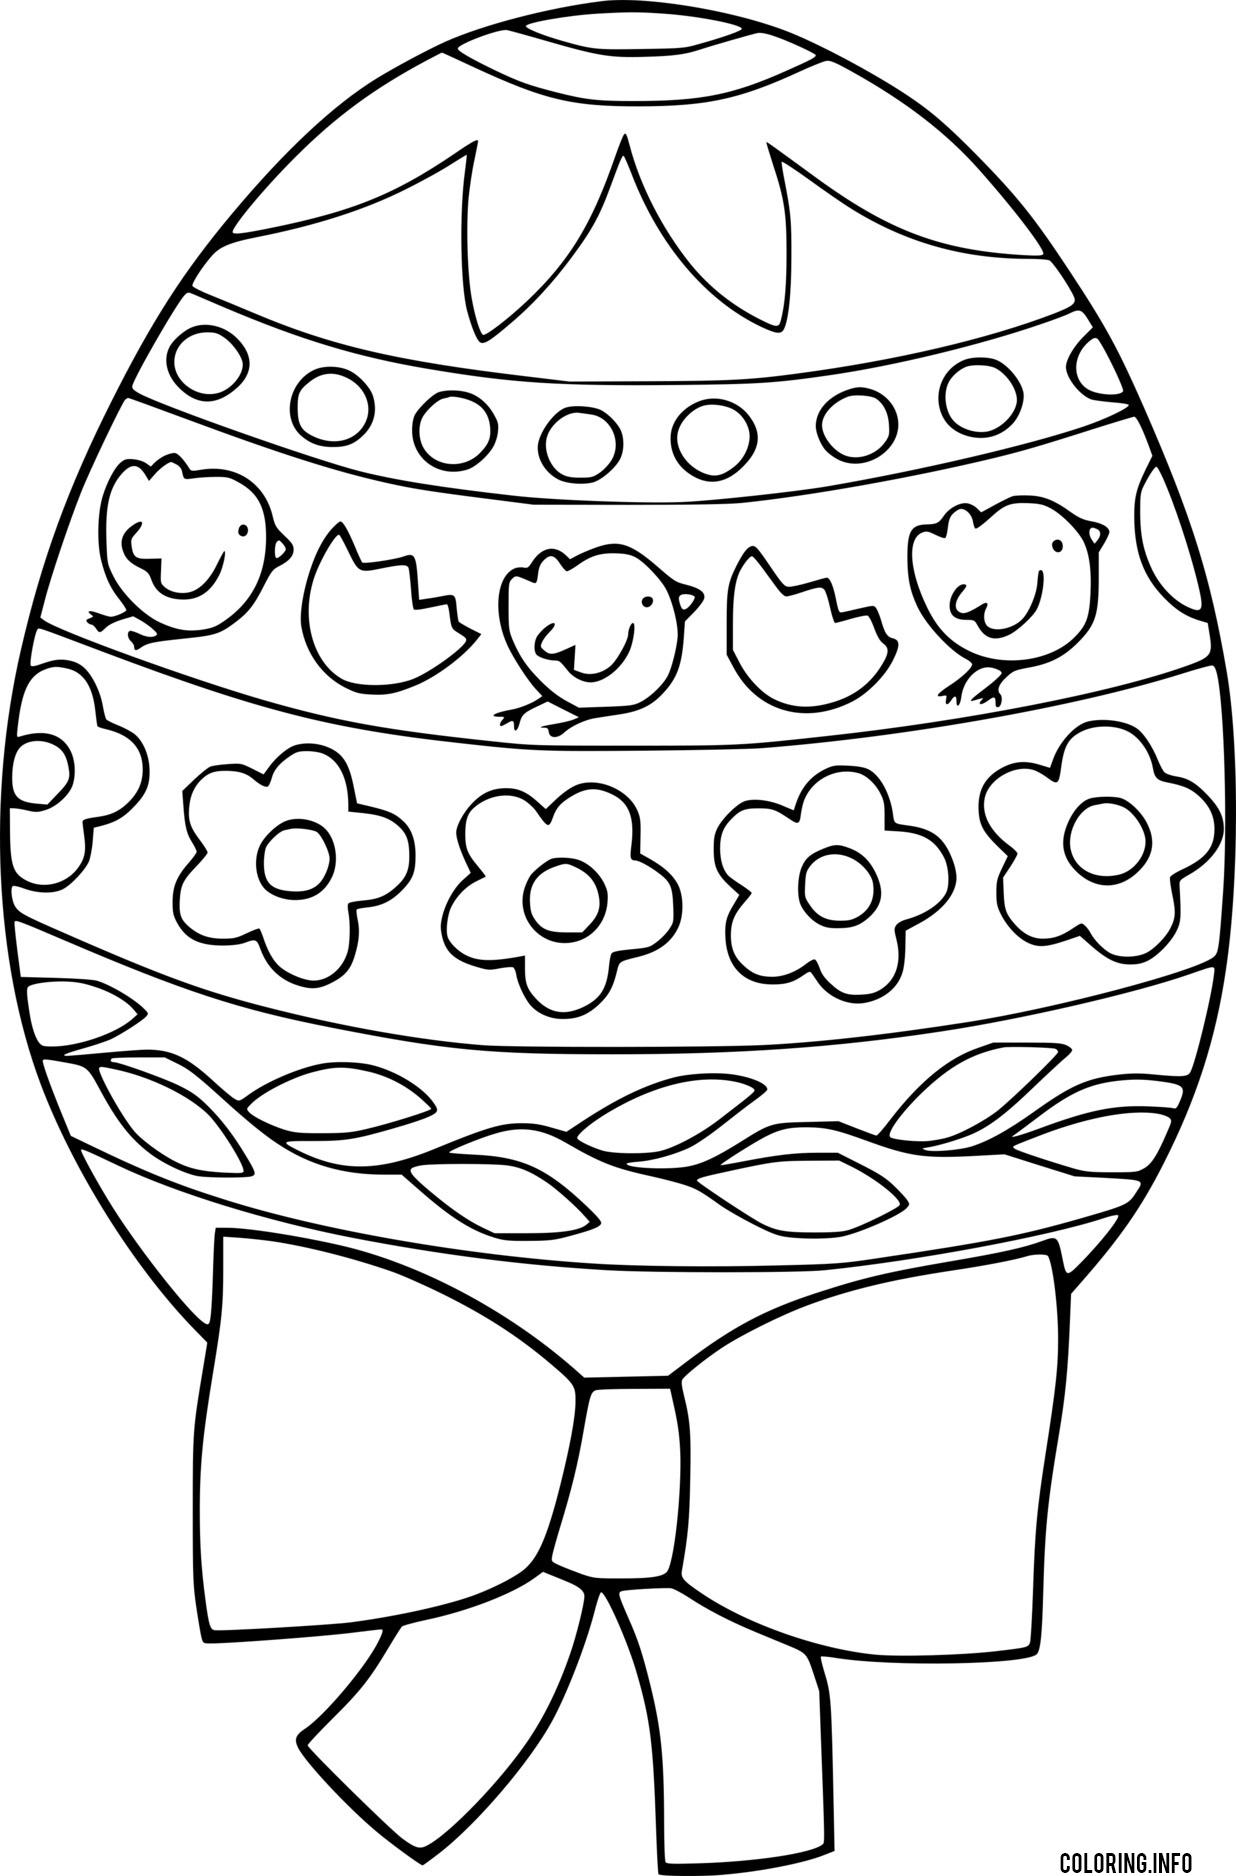 Easter Egg With Chick Patterns coloring